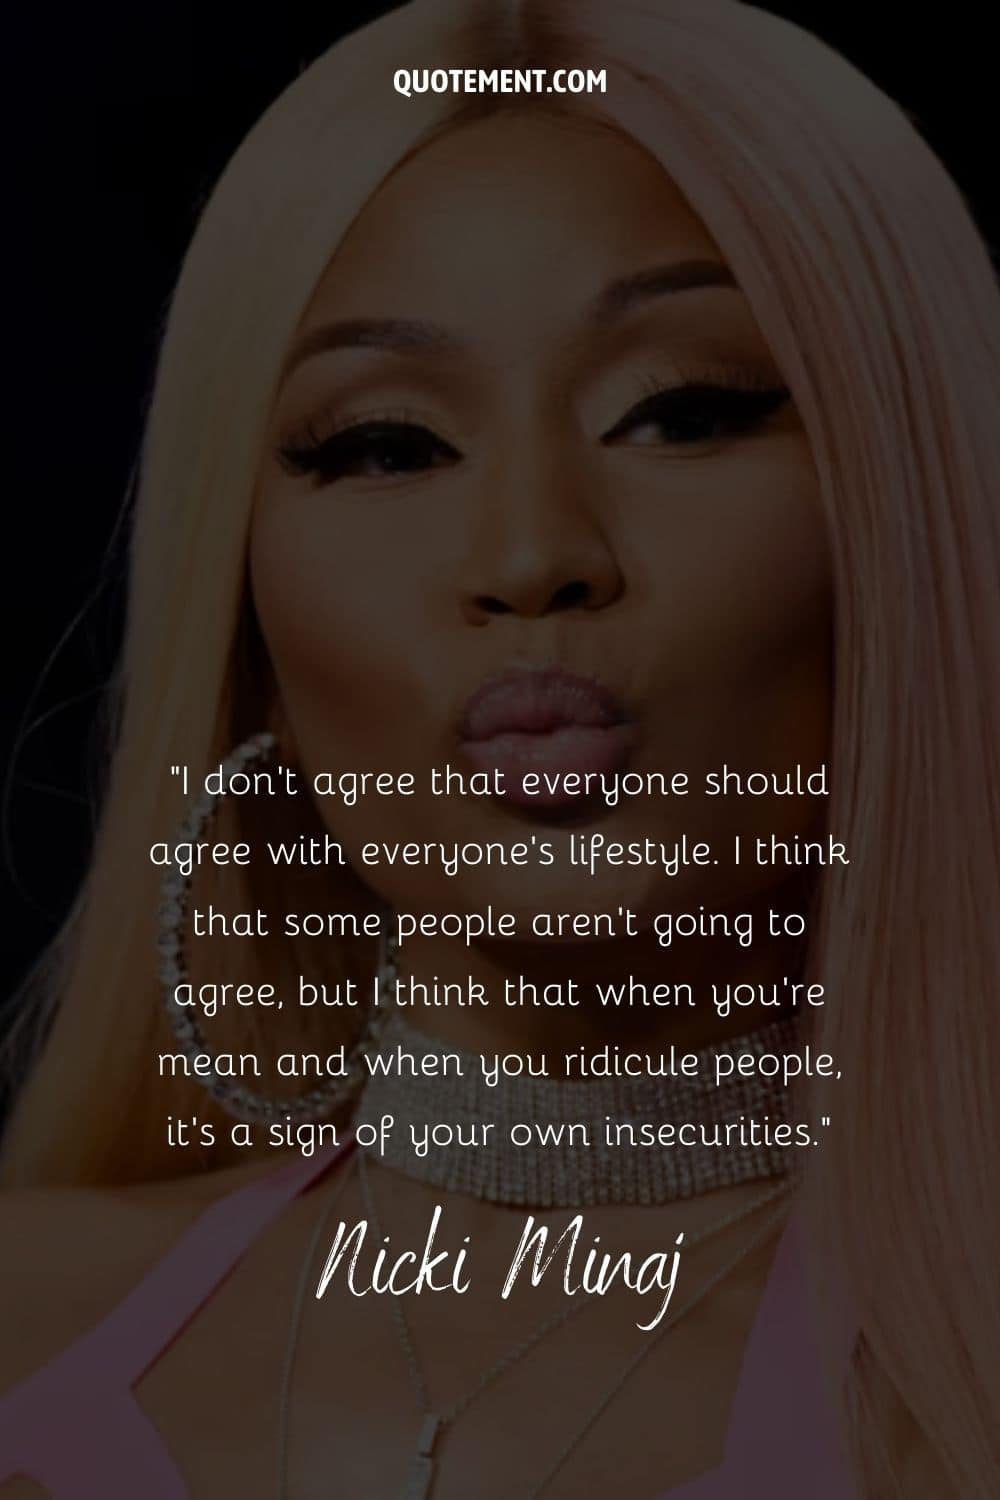 Quote on mean and insecure people by Nicki Minaj and her portrait in the background